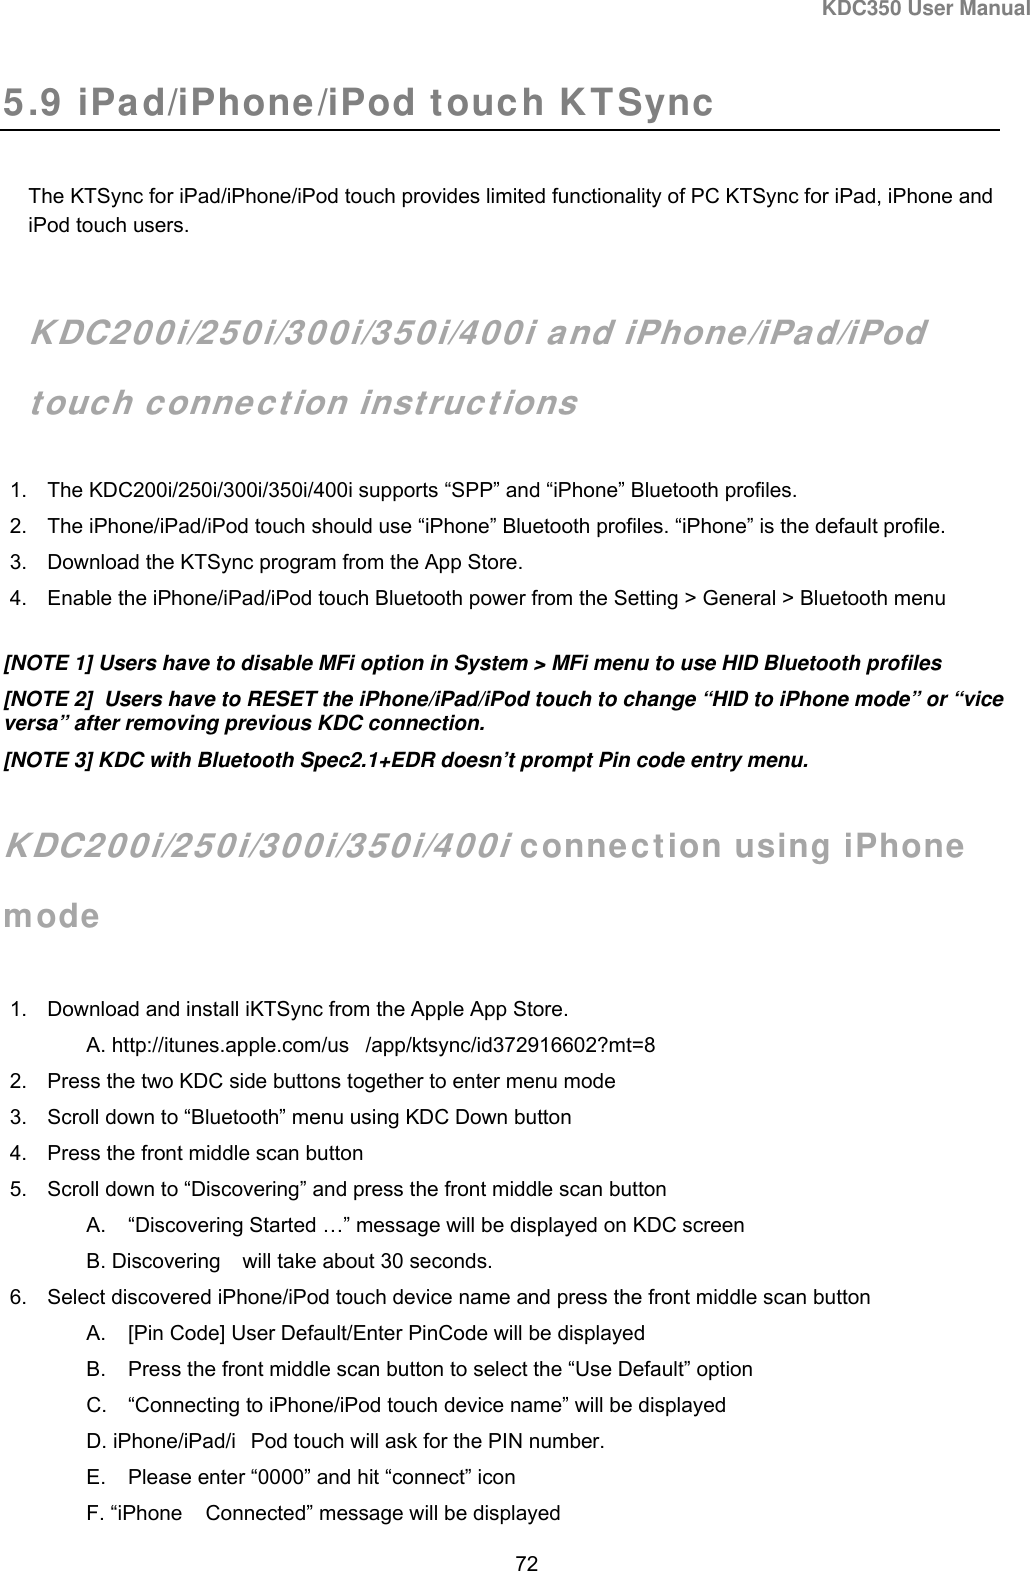 KDC350 User Manual  72  5.9 iPad/iPhone/iPod touch KTSync  The KTSync for iPad/iPhone/iPod touch provides limited functionality of PC KTSync for iPad, iPhone and iPod touch users.   KDC200i/250i/300i/350i/400i and iPhone/iPad/iPod touch connection instructions 1.  The KDC200i/250i/300i/350i/400i supports “SPP” and “iPhone” Bluetooth profiles. 2.  The iPhone/iPad/iPod touch should use “iPhone” Bluetooth profiles. “iPhone” is the default profile. 3.  Download the KTSync program from the App Store. 4.  Enable the iPhone/iPad/iPod touch Bluetooth power from the Setting &gt; General &gt; Bluetooth menu [NOTE 1] Users have to disable MFi option in System &gt; MFi menu to use HID Bluetooth profiles [NOTE 2]  Users have to RESET the iPhone/iPad/iPod touch to change “HID to iPhone mode” or “vice versa” after removing previous KDC connection. [NOTE 3] KDC with Bluetooth Spec2.1+EDR doesn’t prompt Pin code entry menu.  KDC200i/250i/300i/350i/400i connection using iPhone mode  1.  Download and install iKTSync from the Apple App Store. A. http://itunes.apple.com/us /app/ktsync/id372916602?mt=8 2.  Press the two KDC side buttons together to enter menu mode 3.  Scroll down to “Bluetooth” menu using KDC Down button 4.  Press the front middle scan button 5.  Scroll down to “Discovering” and press the front middle scan button A.  “Discovering Started …” message will be displayed on KDC screen B. Discovering will take about 30 seconds. 6.  Select discovered iPhone/iPod touch device name and press the front middle scan button A.  [Pin Code] User Default/Enter PinCode will be displayed B.  Press the front middle scan button to select the “Use Default” option C.  “Connecting to iPhone/iPod touch device name” will be displayed D. iPhone/iPad/i Pod touch will ask for the PIN number. E.  Please enter “0000” and hit “connect” icon F. “iPhone Connected” message will be displayed 